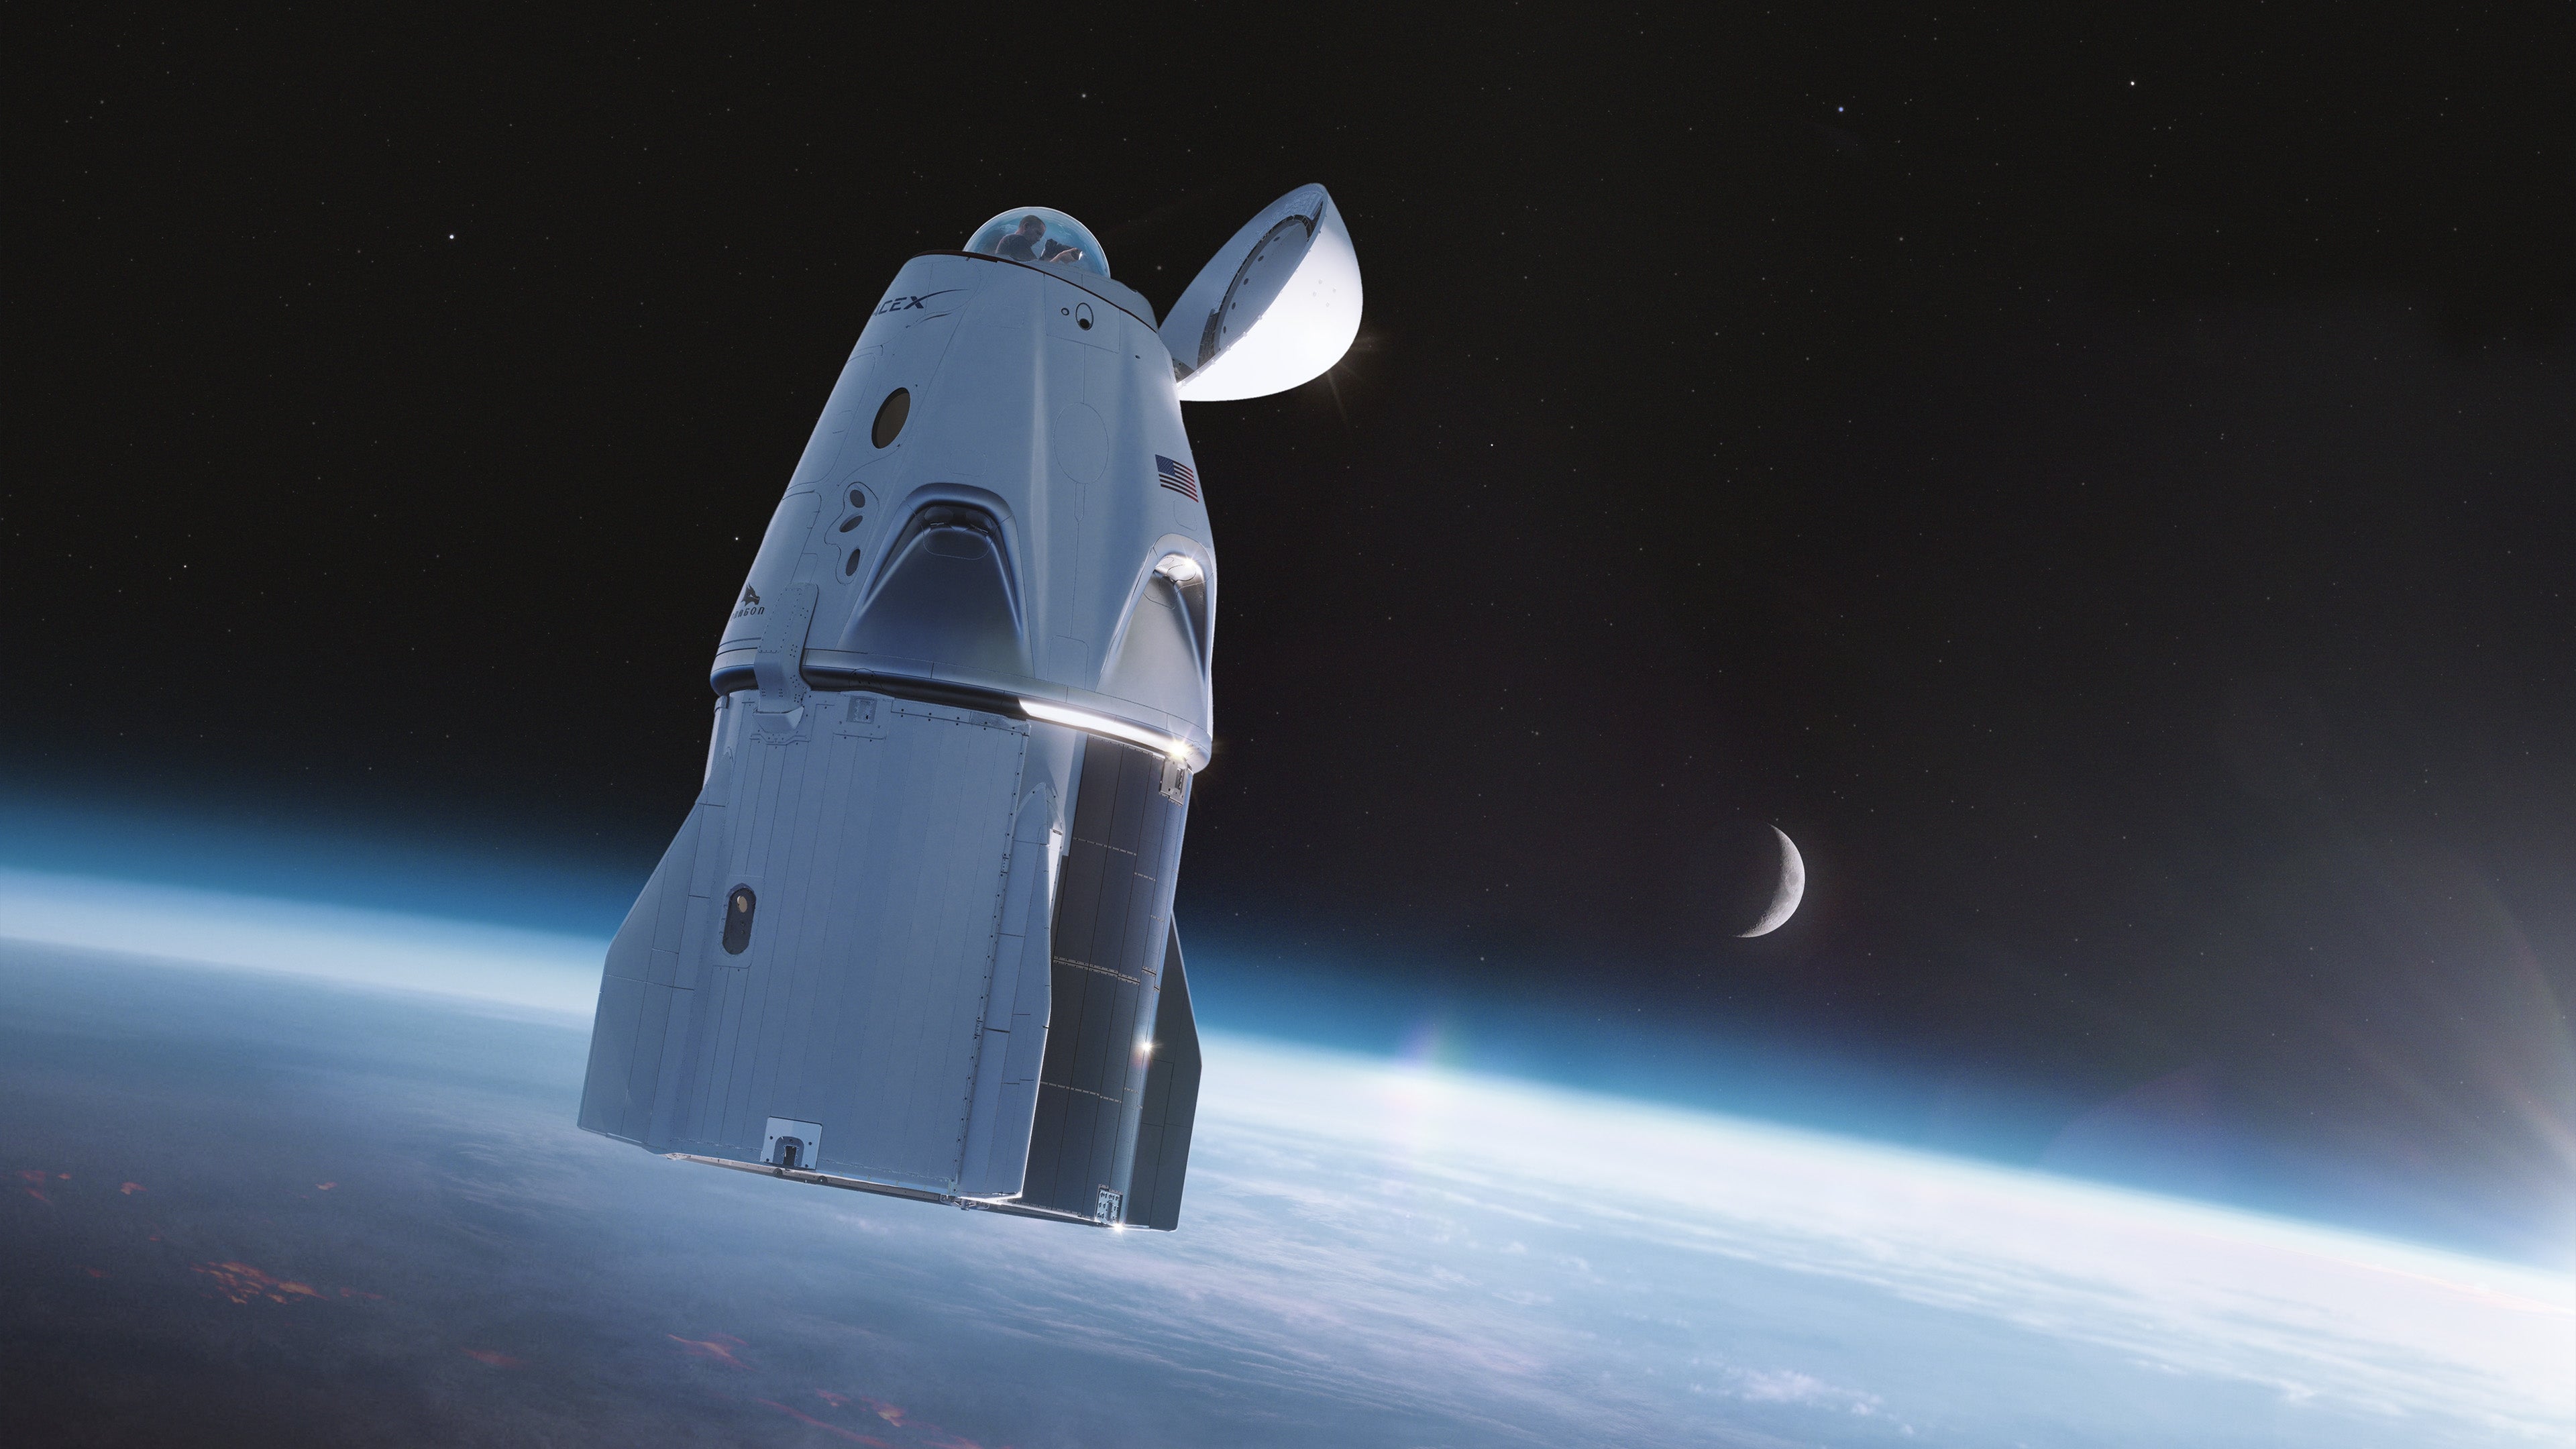 Inspiration4 Commander Shares SpaceX Already Installed A 'Cupola' Window On The Crew Dragon They Will Ride